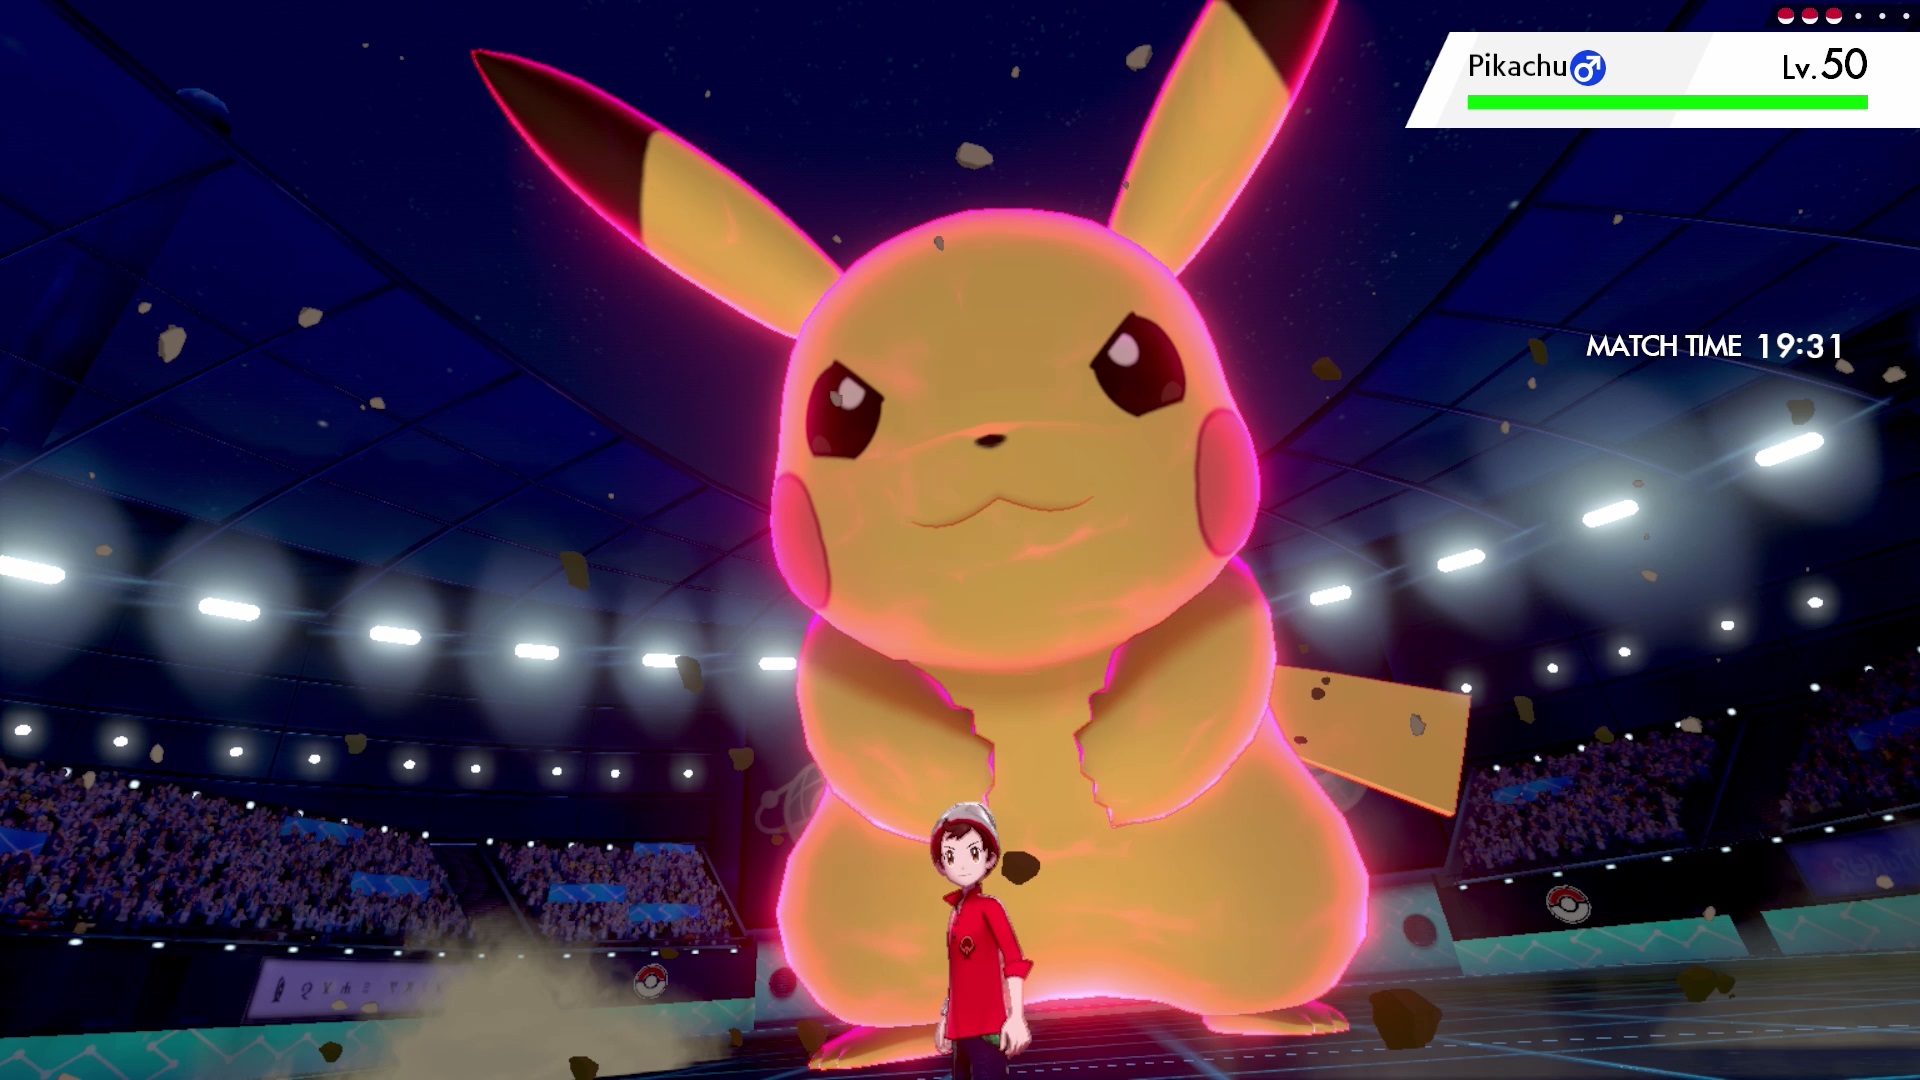 Pokémon Sword and Shield launch on November 15th